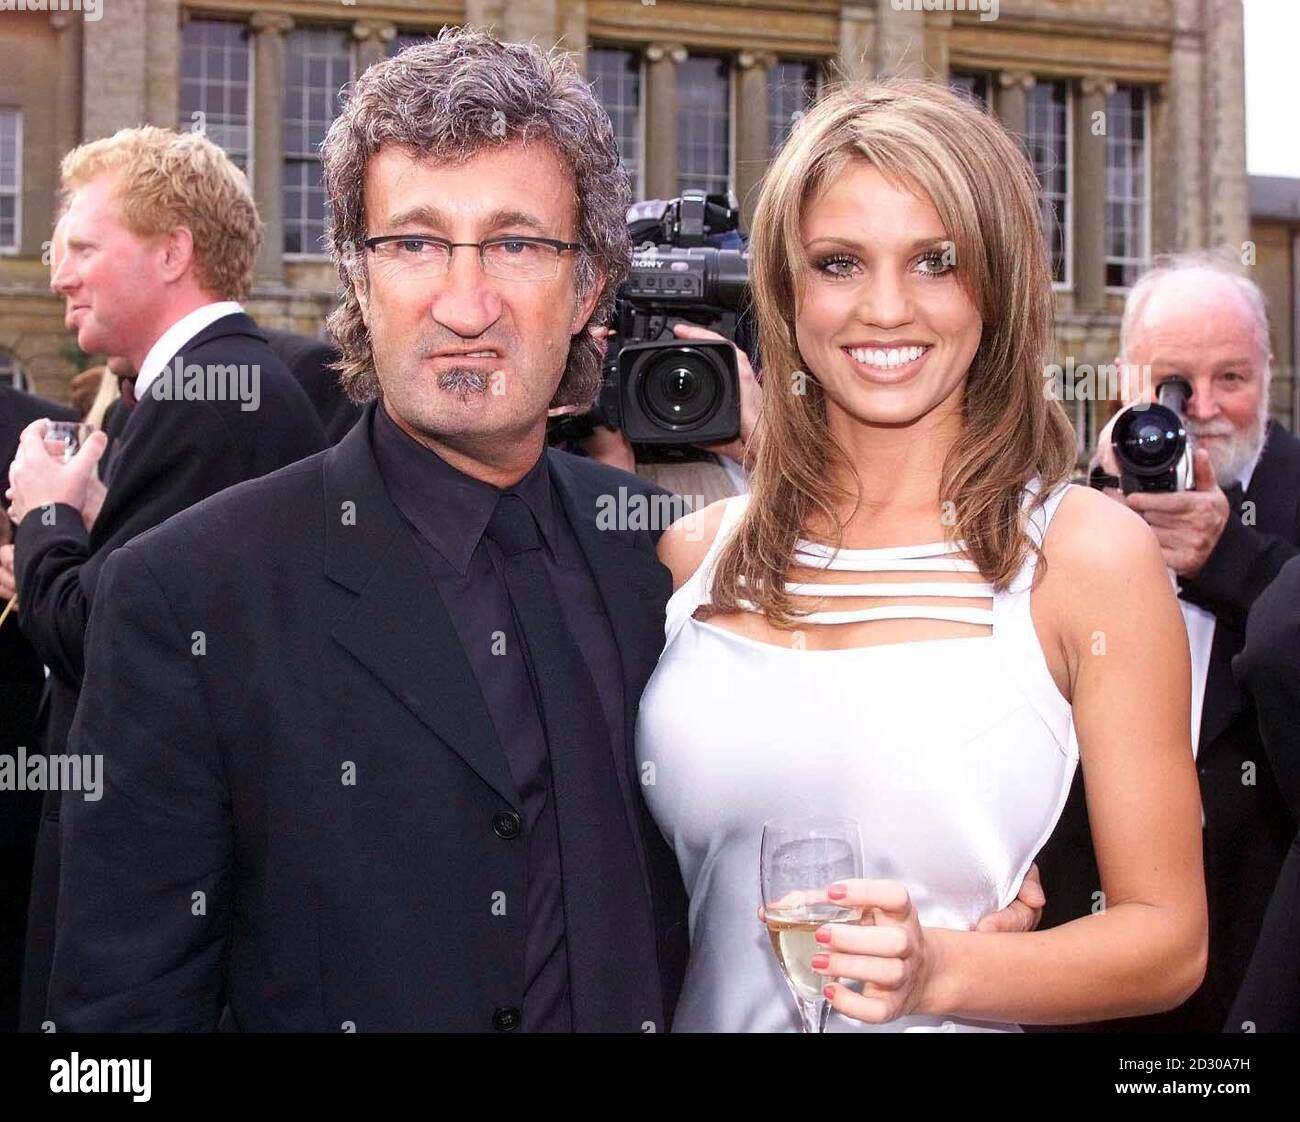 Jordan formula one team boss Eddie Jordan poses with page 3 model Jordan at  the celebrity ball in aid of Children with Leukimia, at Stowe school in  Northants Stock Photo - Alamy